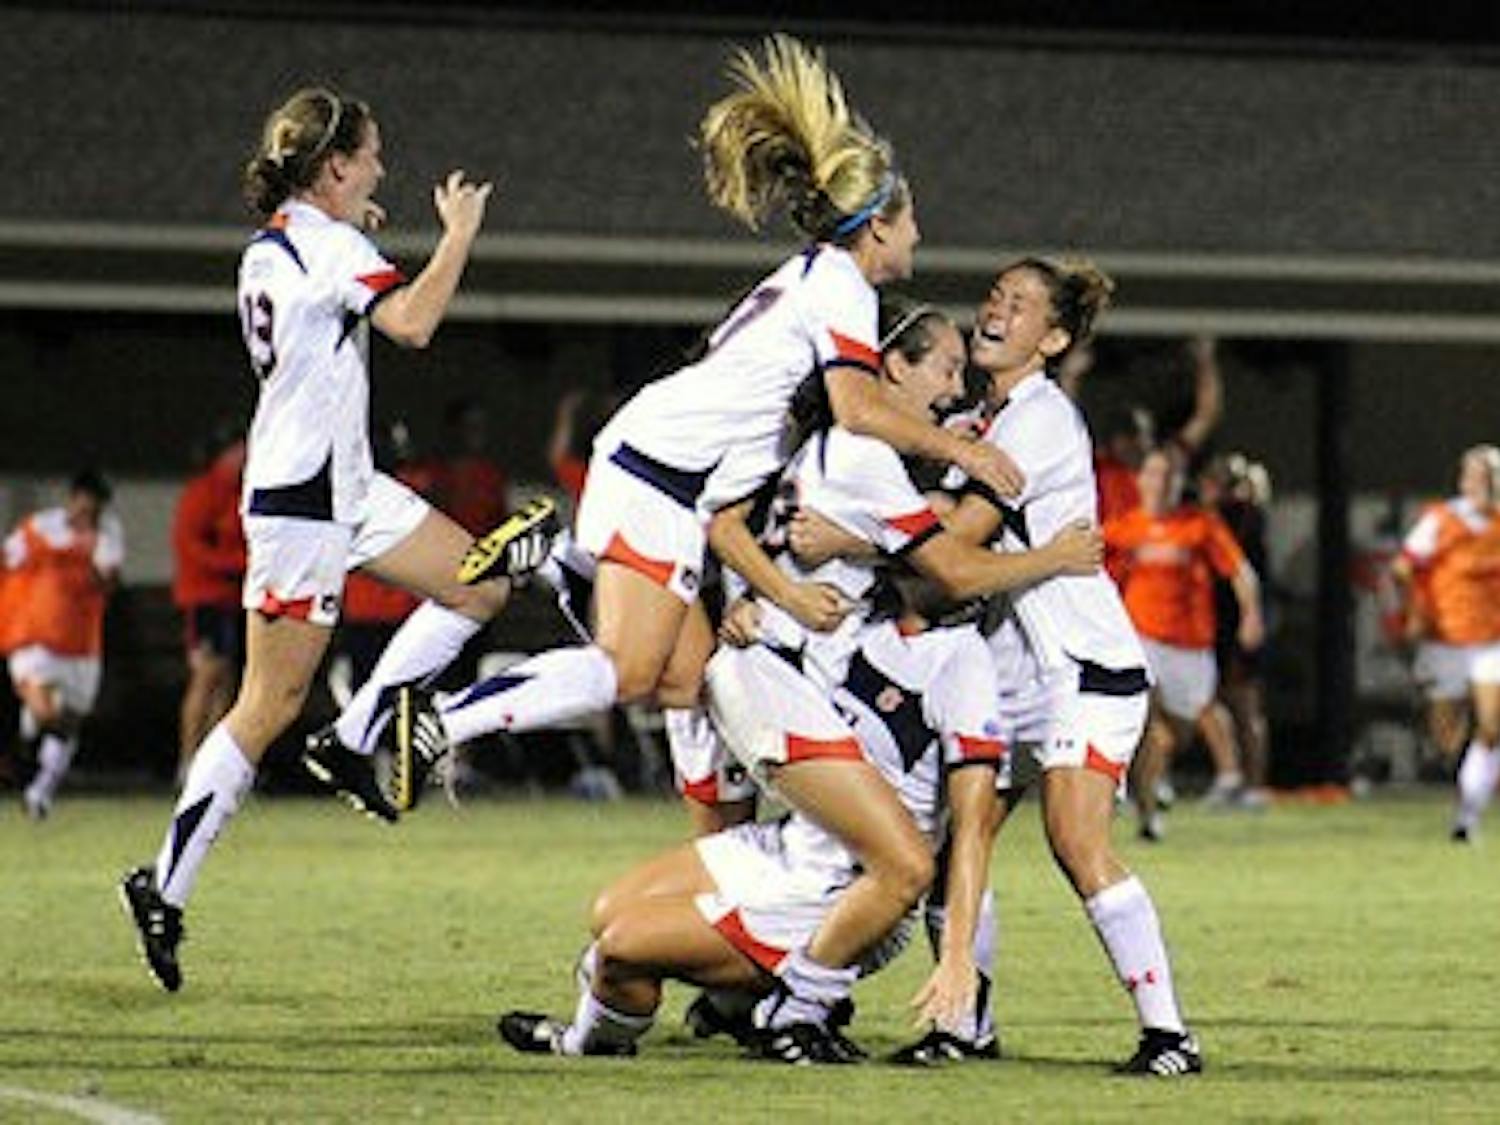 Katy Frierson celebrates with her teammates after scoring the winning goal in overtime against FSU earlier this season. (Todd Van Emst / Media Relations)